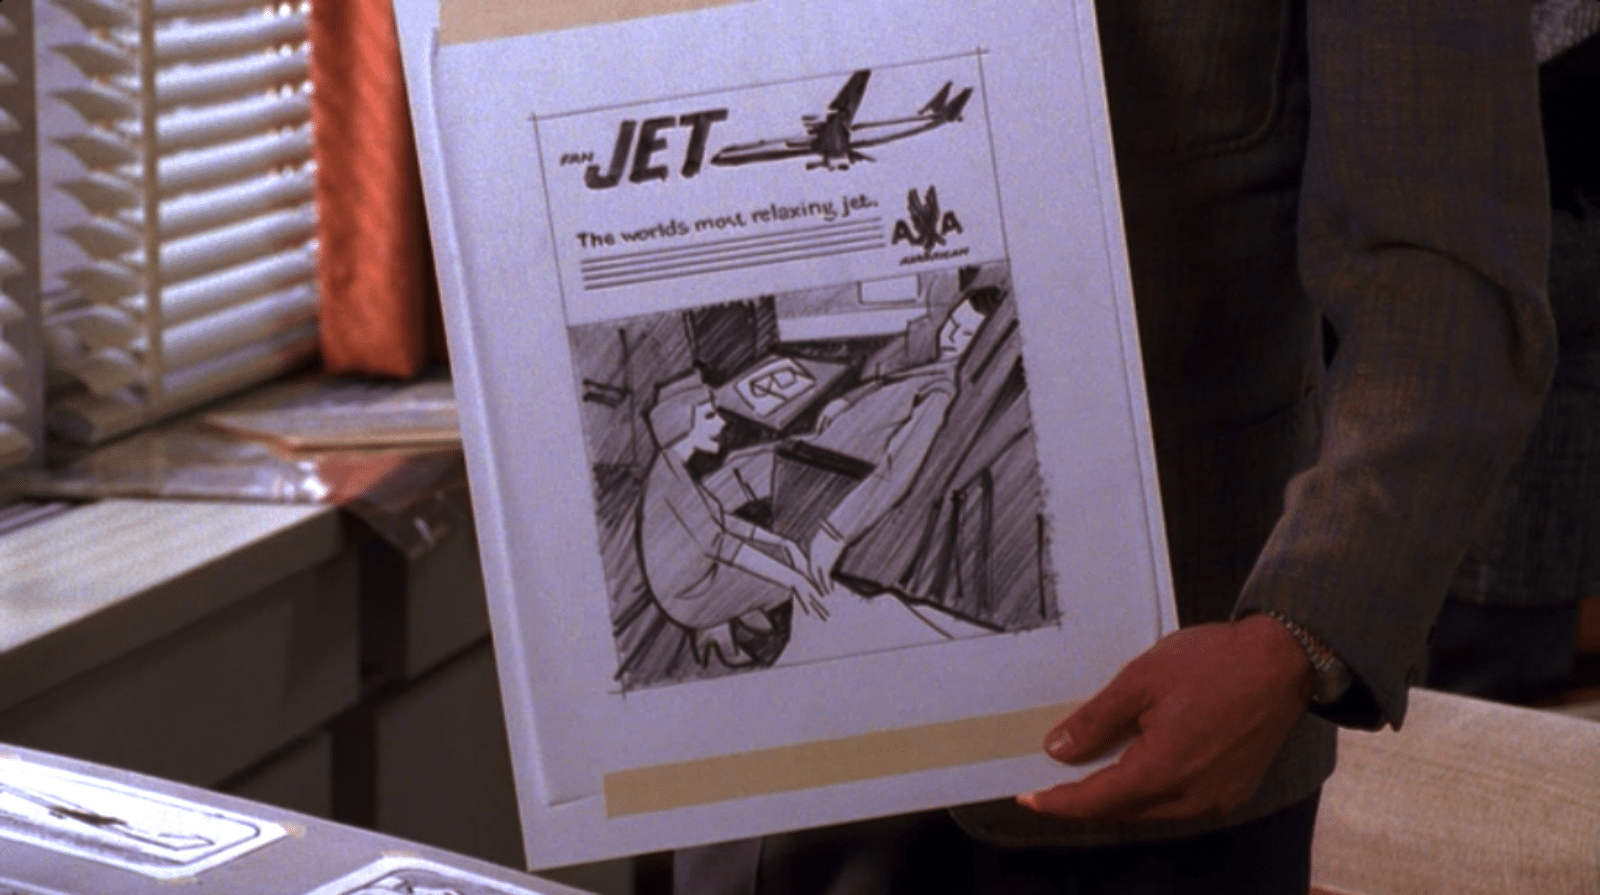 The episode begins when an American Airlines Boeing 707 on its way to Los Angeles crashes shortly after takeoff from Idlewild (now New York's JFK), killing all onboard.  Don immediately moves into damage control for their client, the small regional line Mohawk Air. "We don't want people opening their morning paper seeing a Mohawk ad next to a picture of a floating engine," Don says. "The rest of you stop crying and figure out how we're going to hit the ground running in three weeks with new work." 